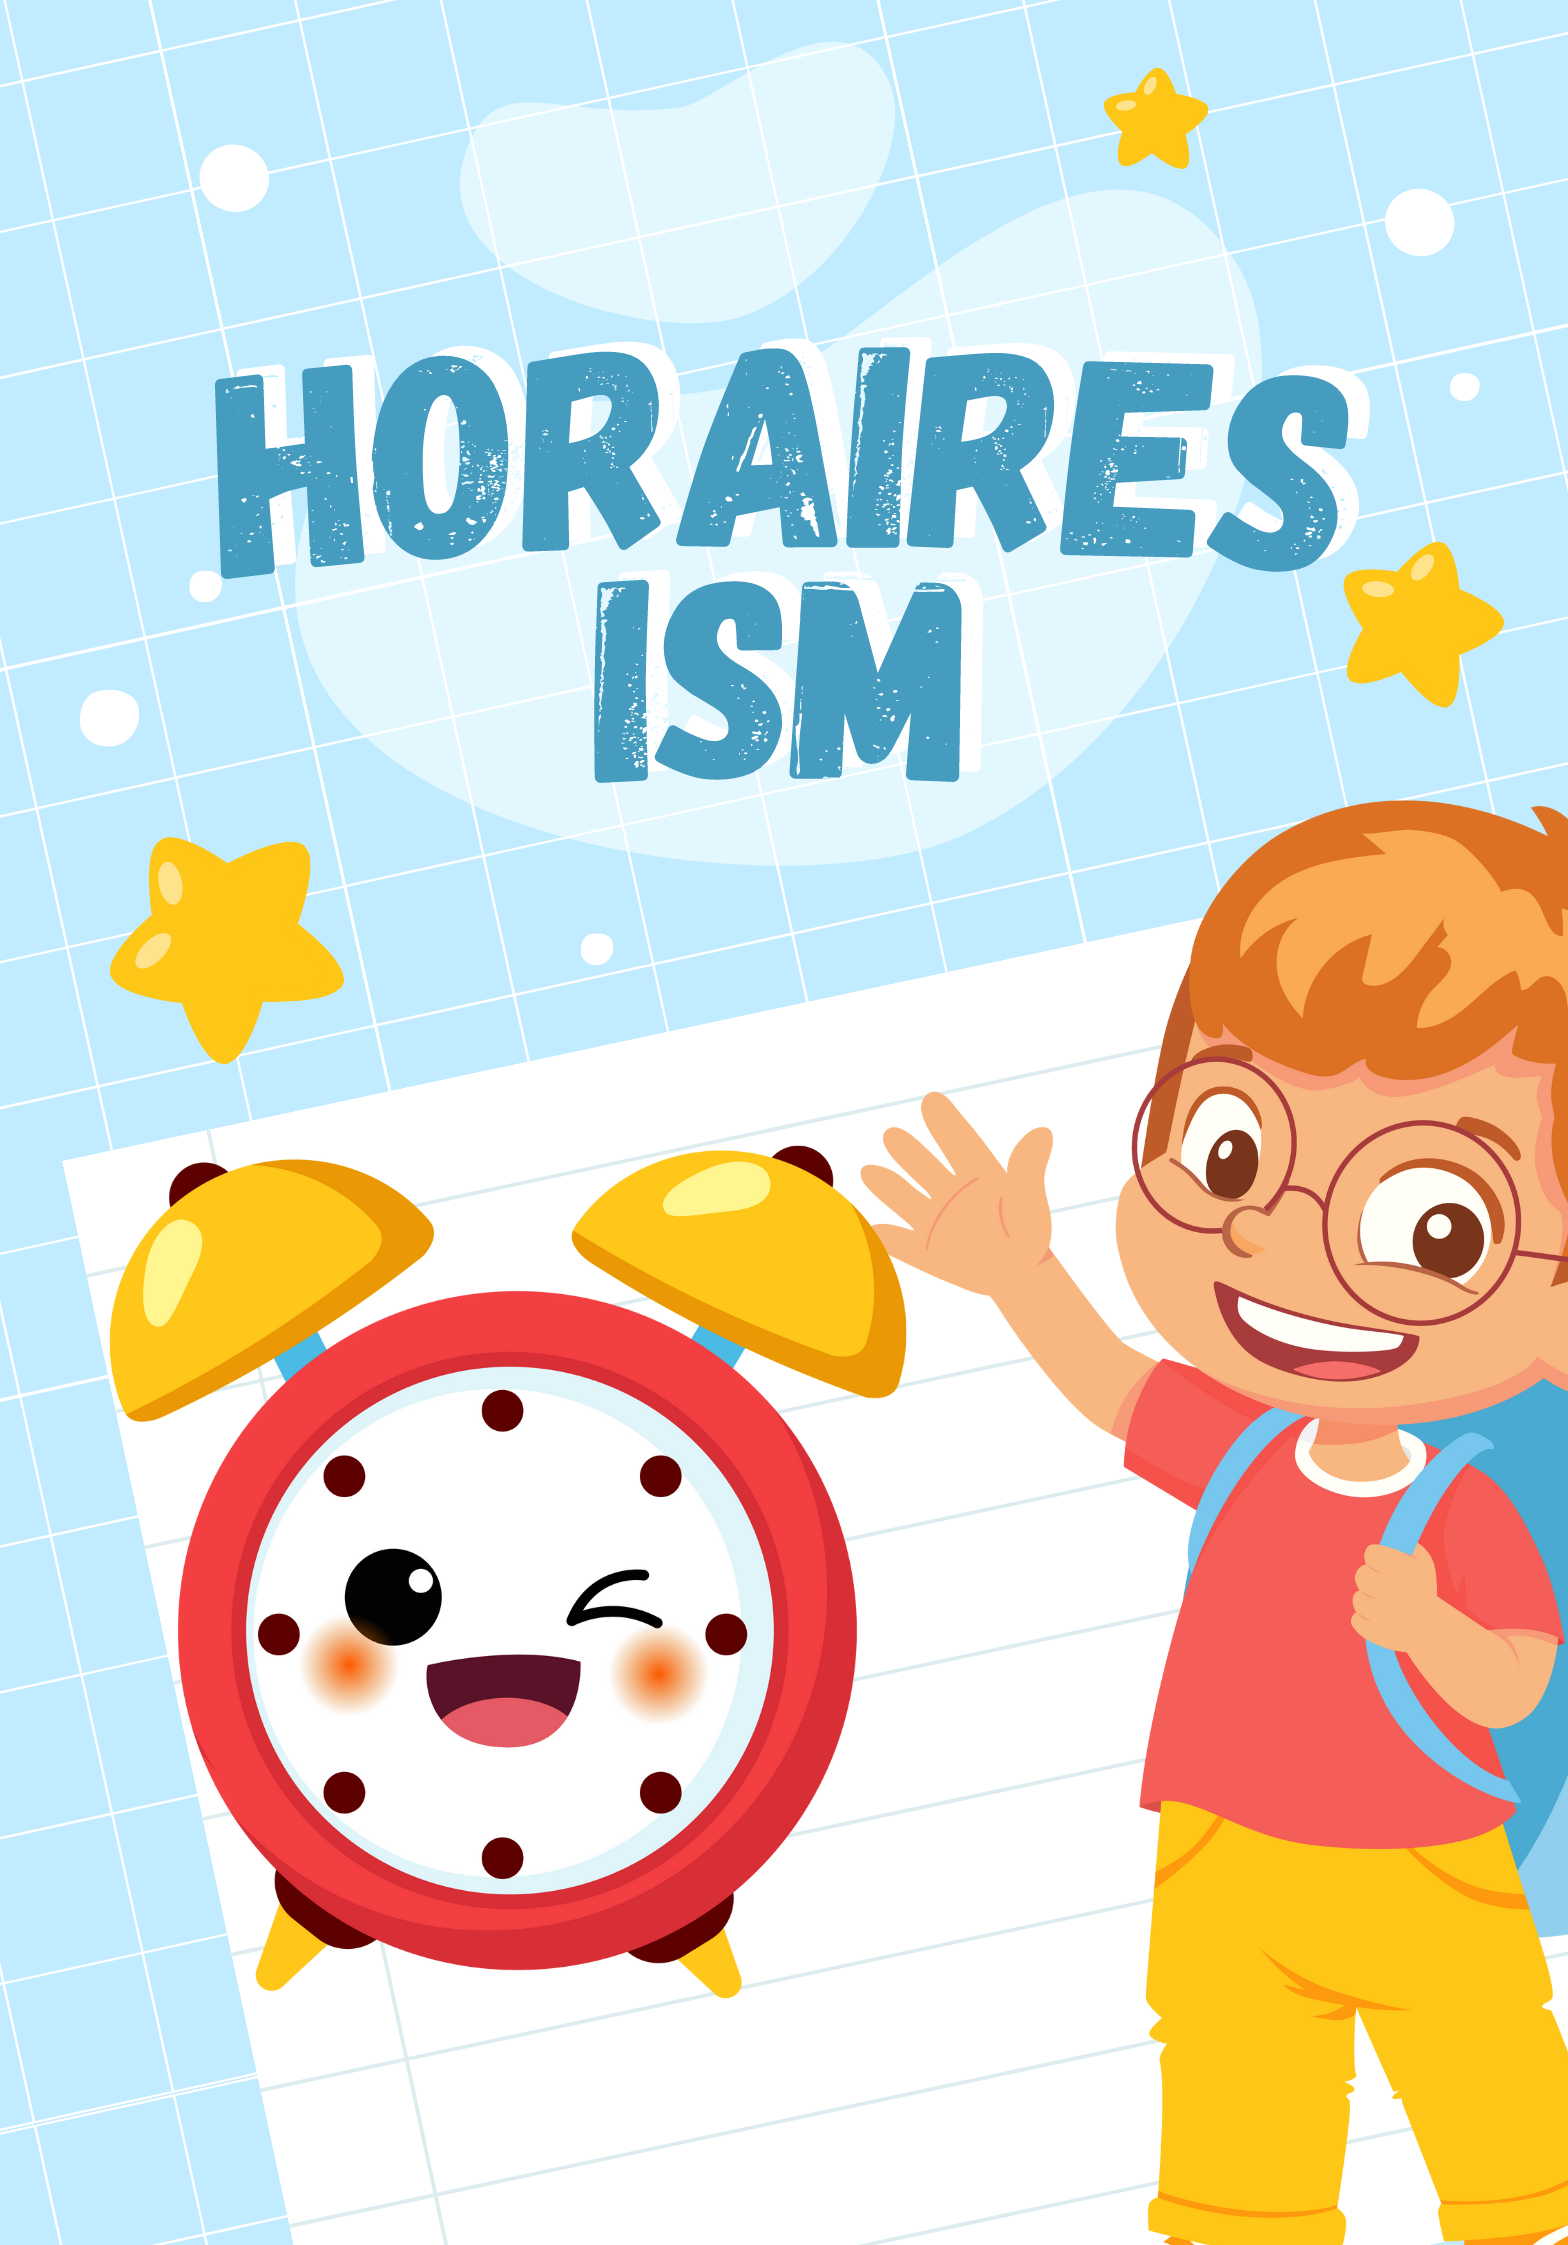 HORAIRES ISM